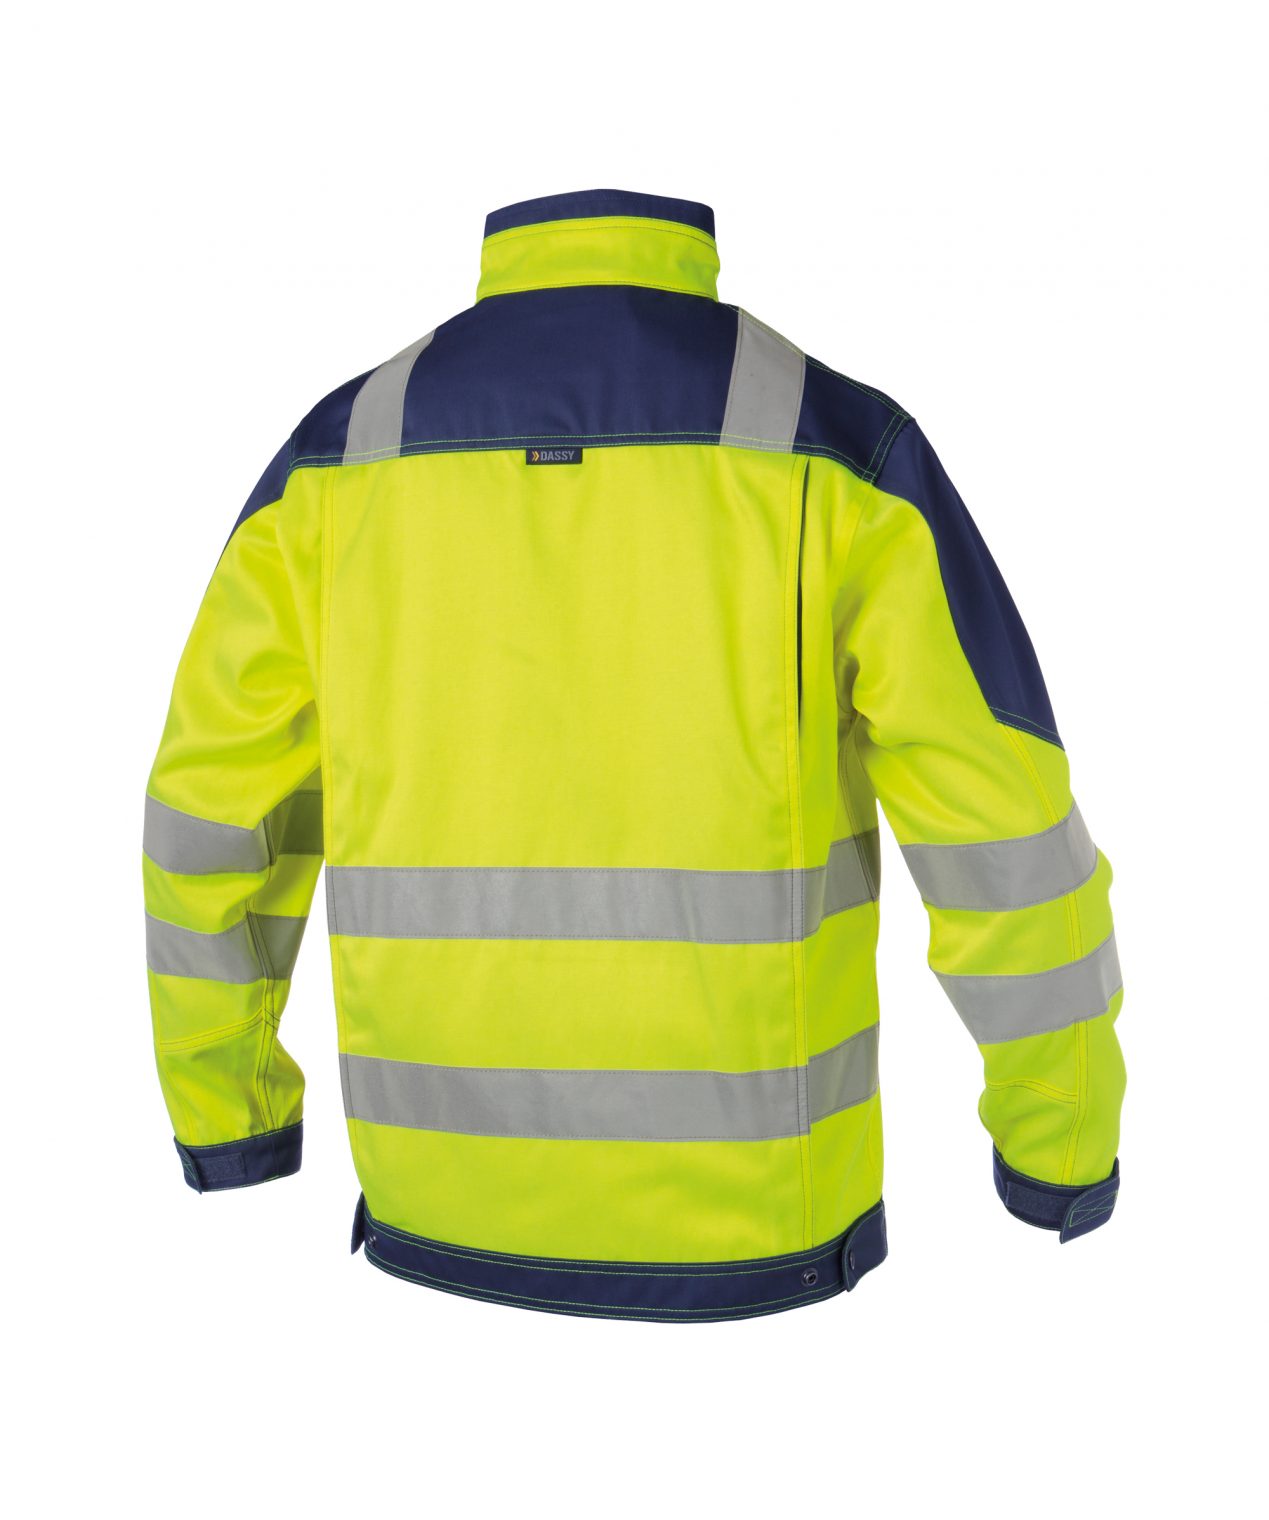 orlando high visibility work jacket fluo yellow navy back